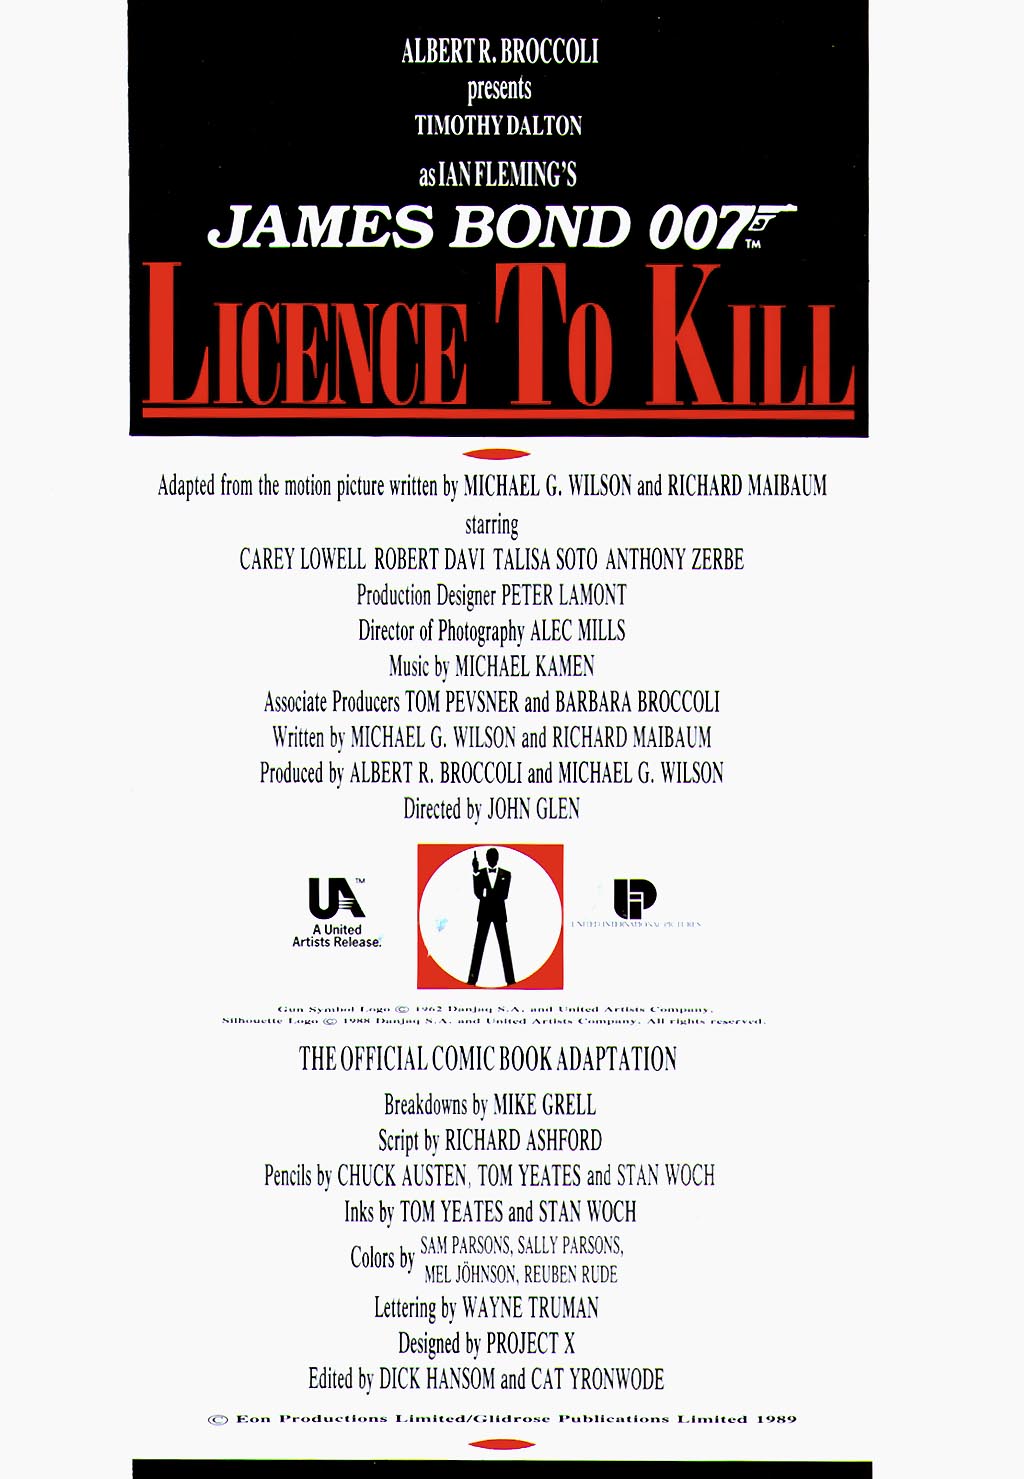 Read online Licence to Kill comic -  Issue # Full - 3